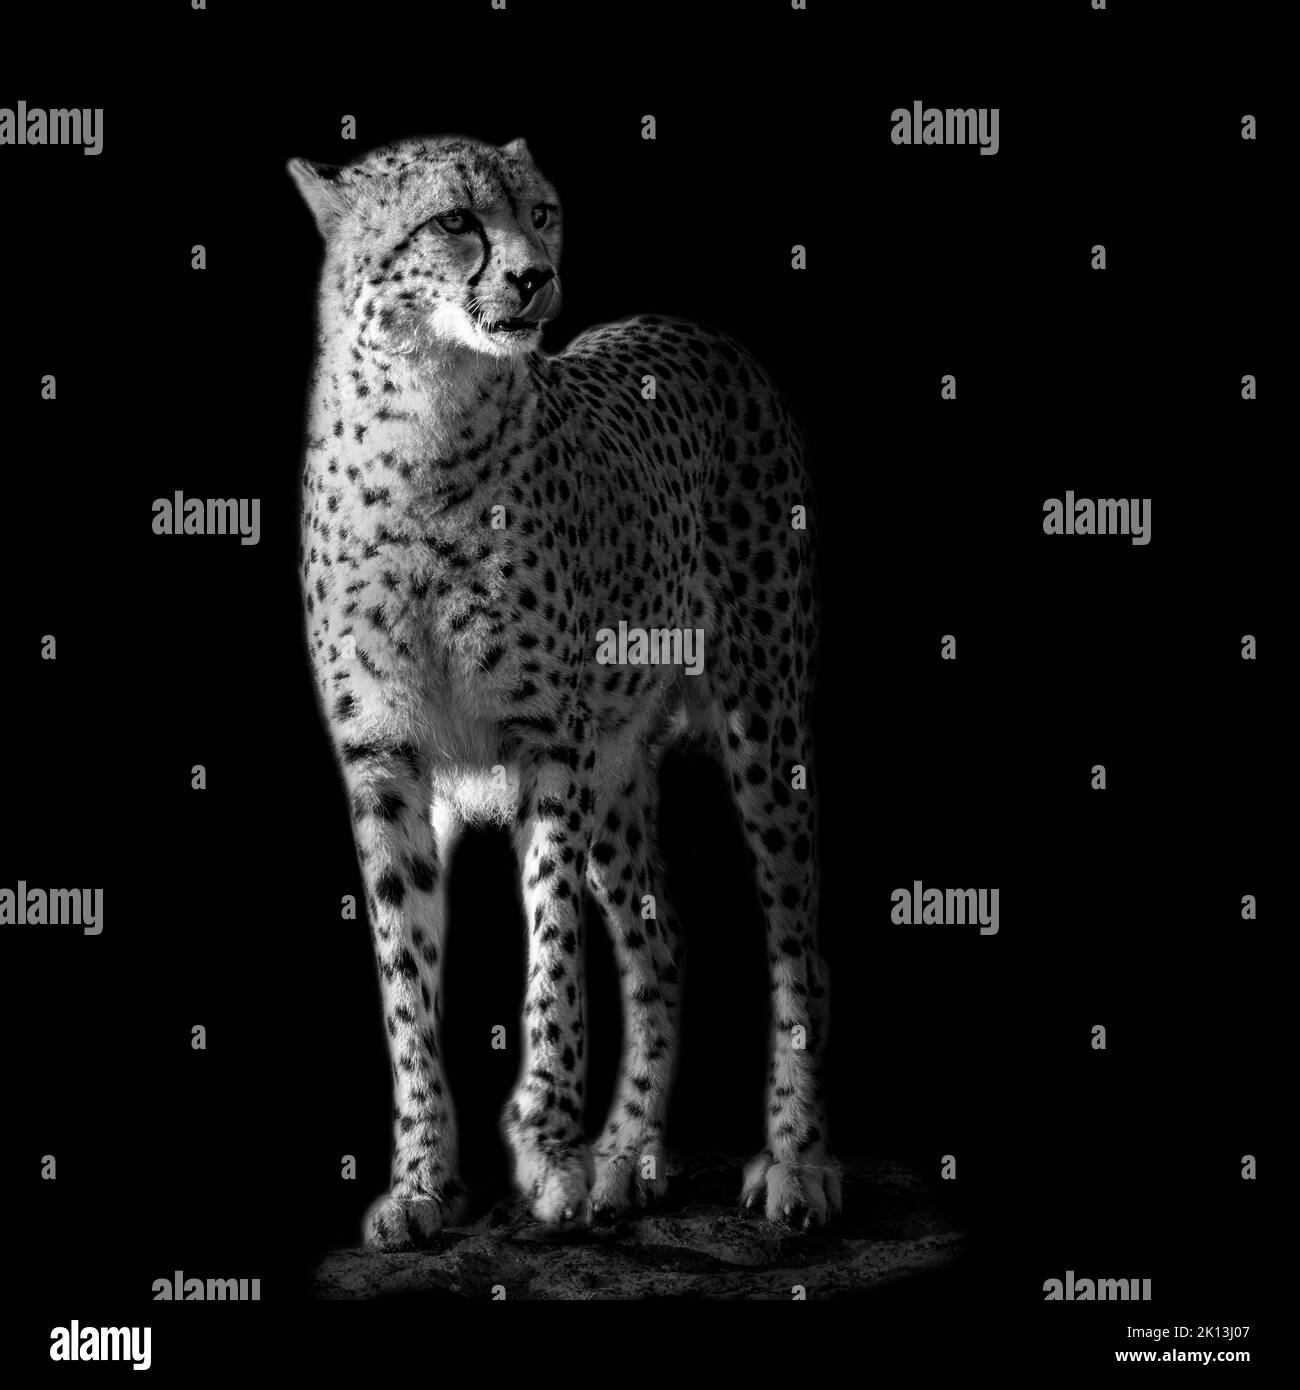 Mono portrait of a cheetah, with black background Stock Photo